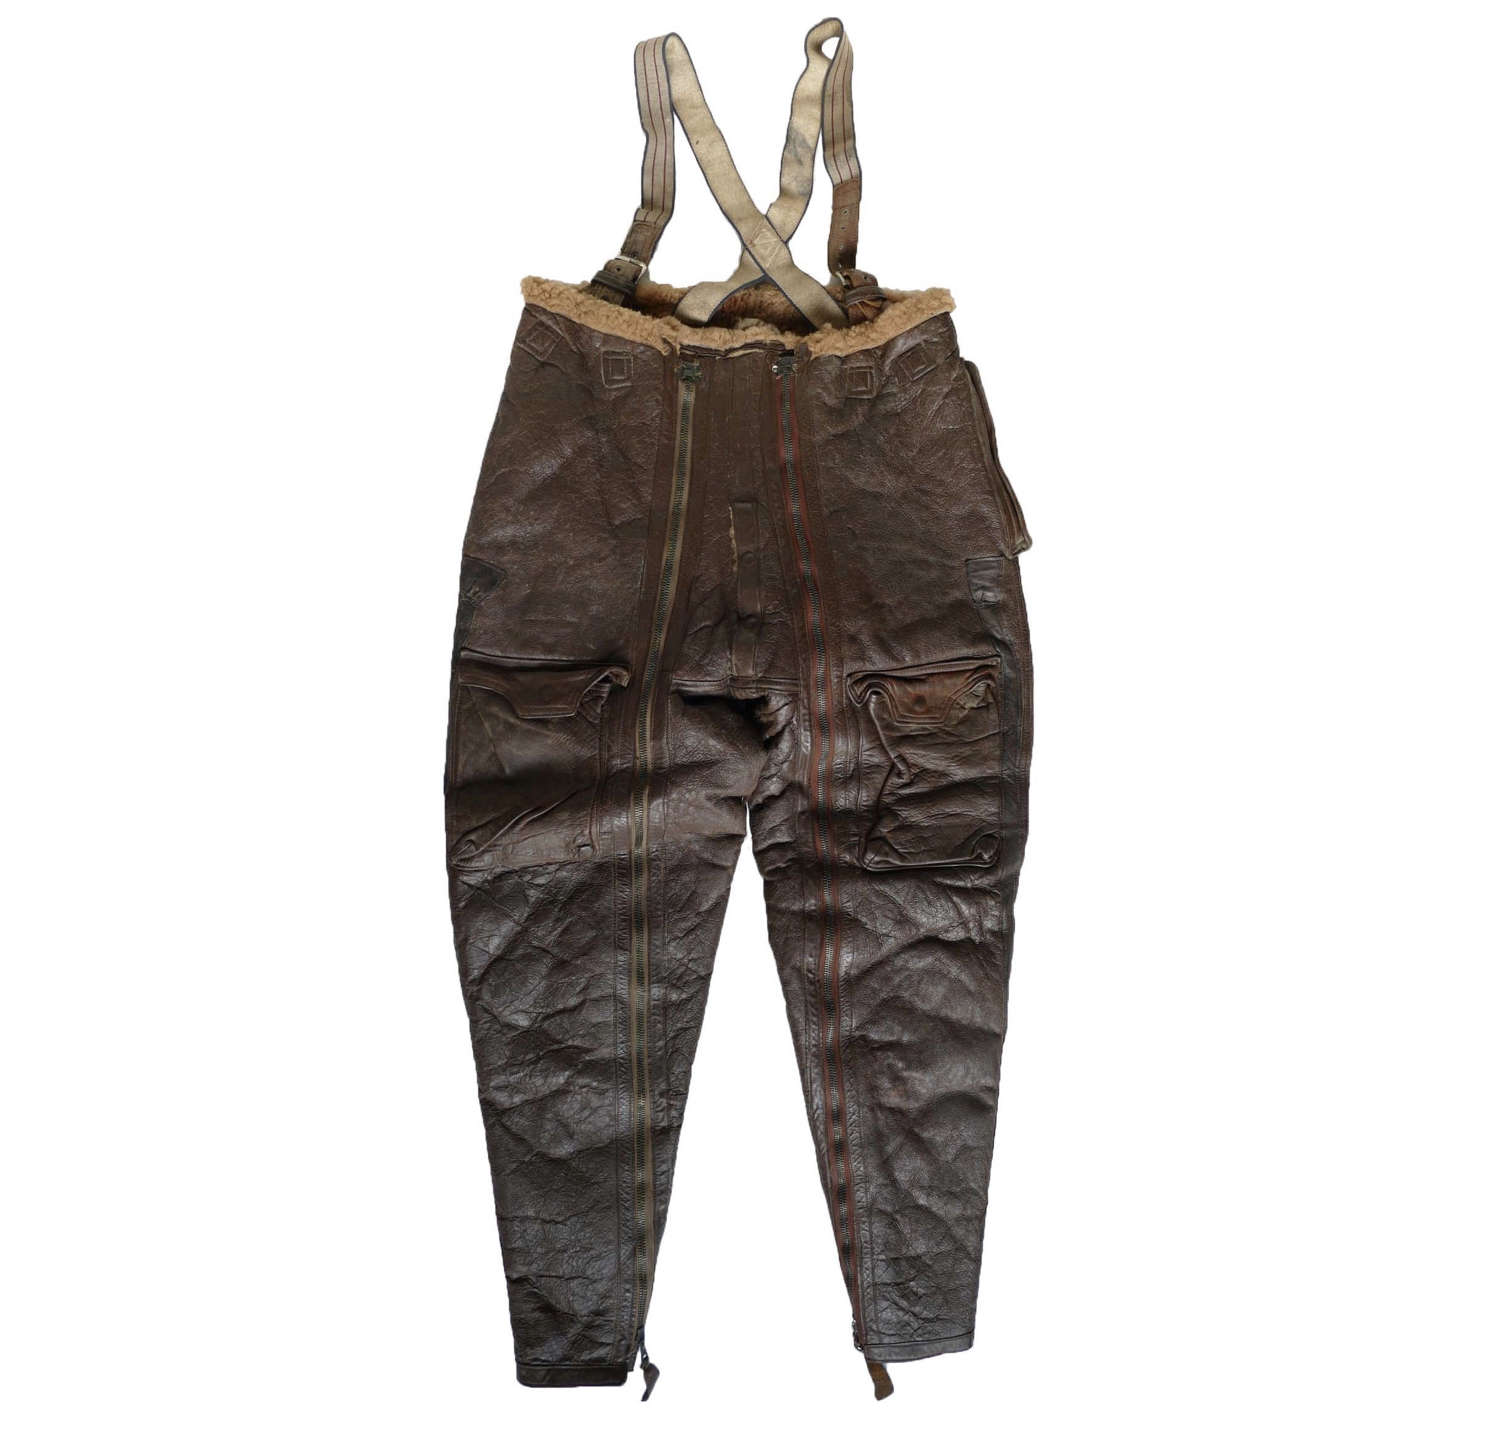 RAF Irvin flying trousers - history